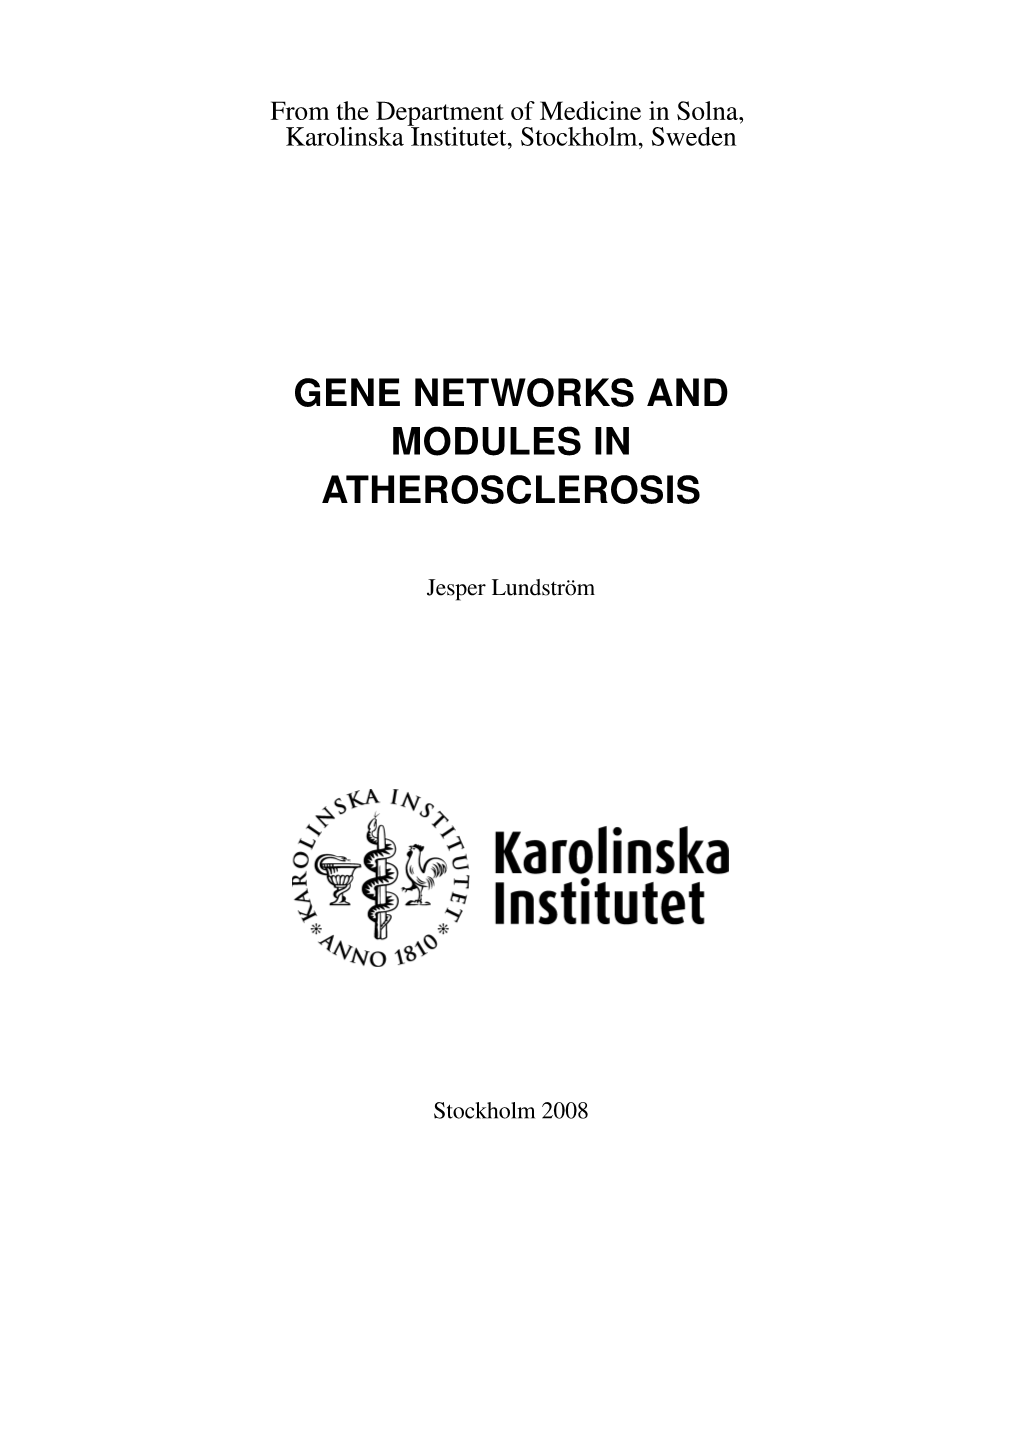 Gene Networks and Modules in Atherosclerosis